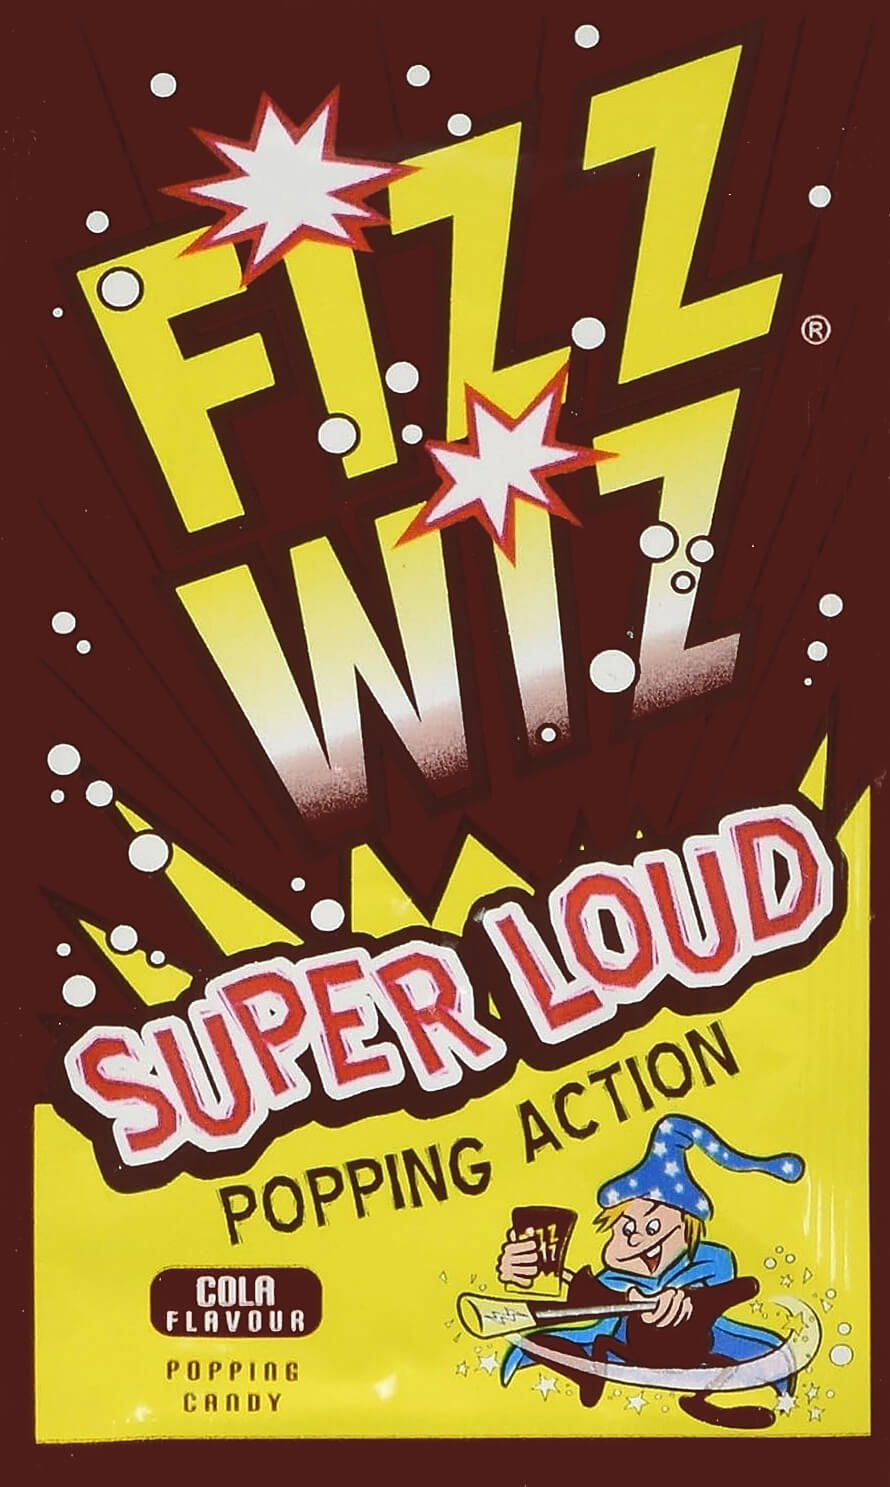 A packet of Fizz Wizz cola flavour with brown and yellow colours